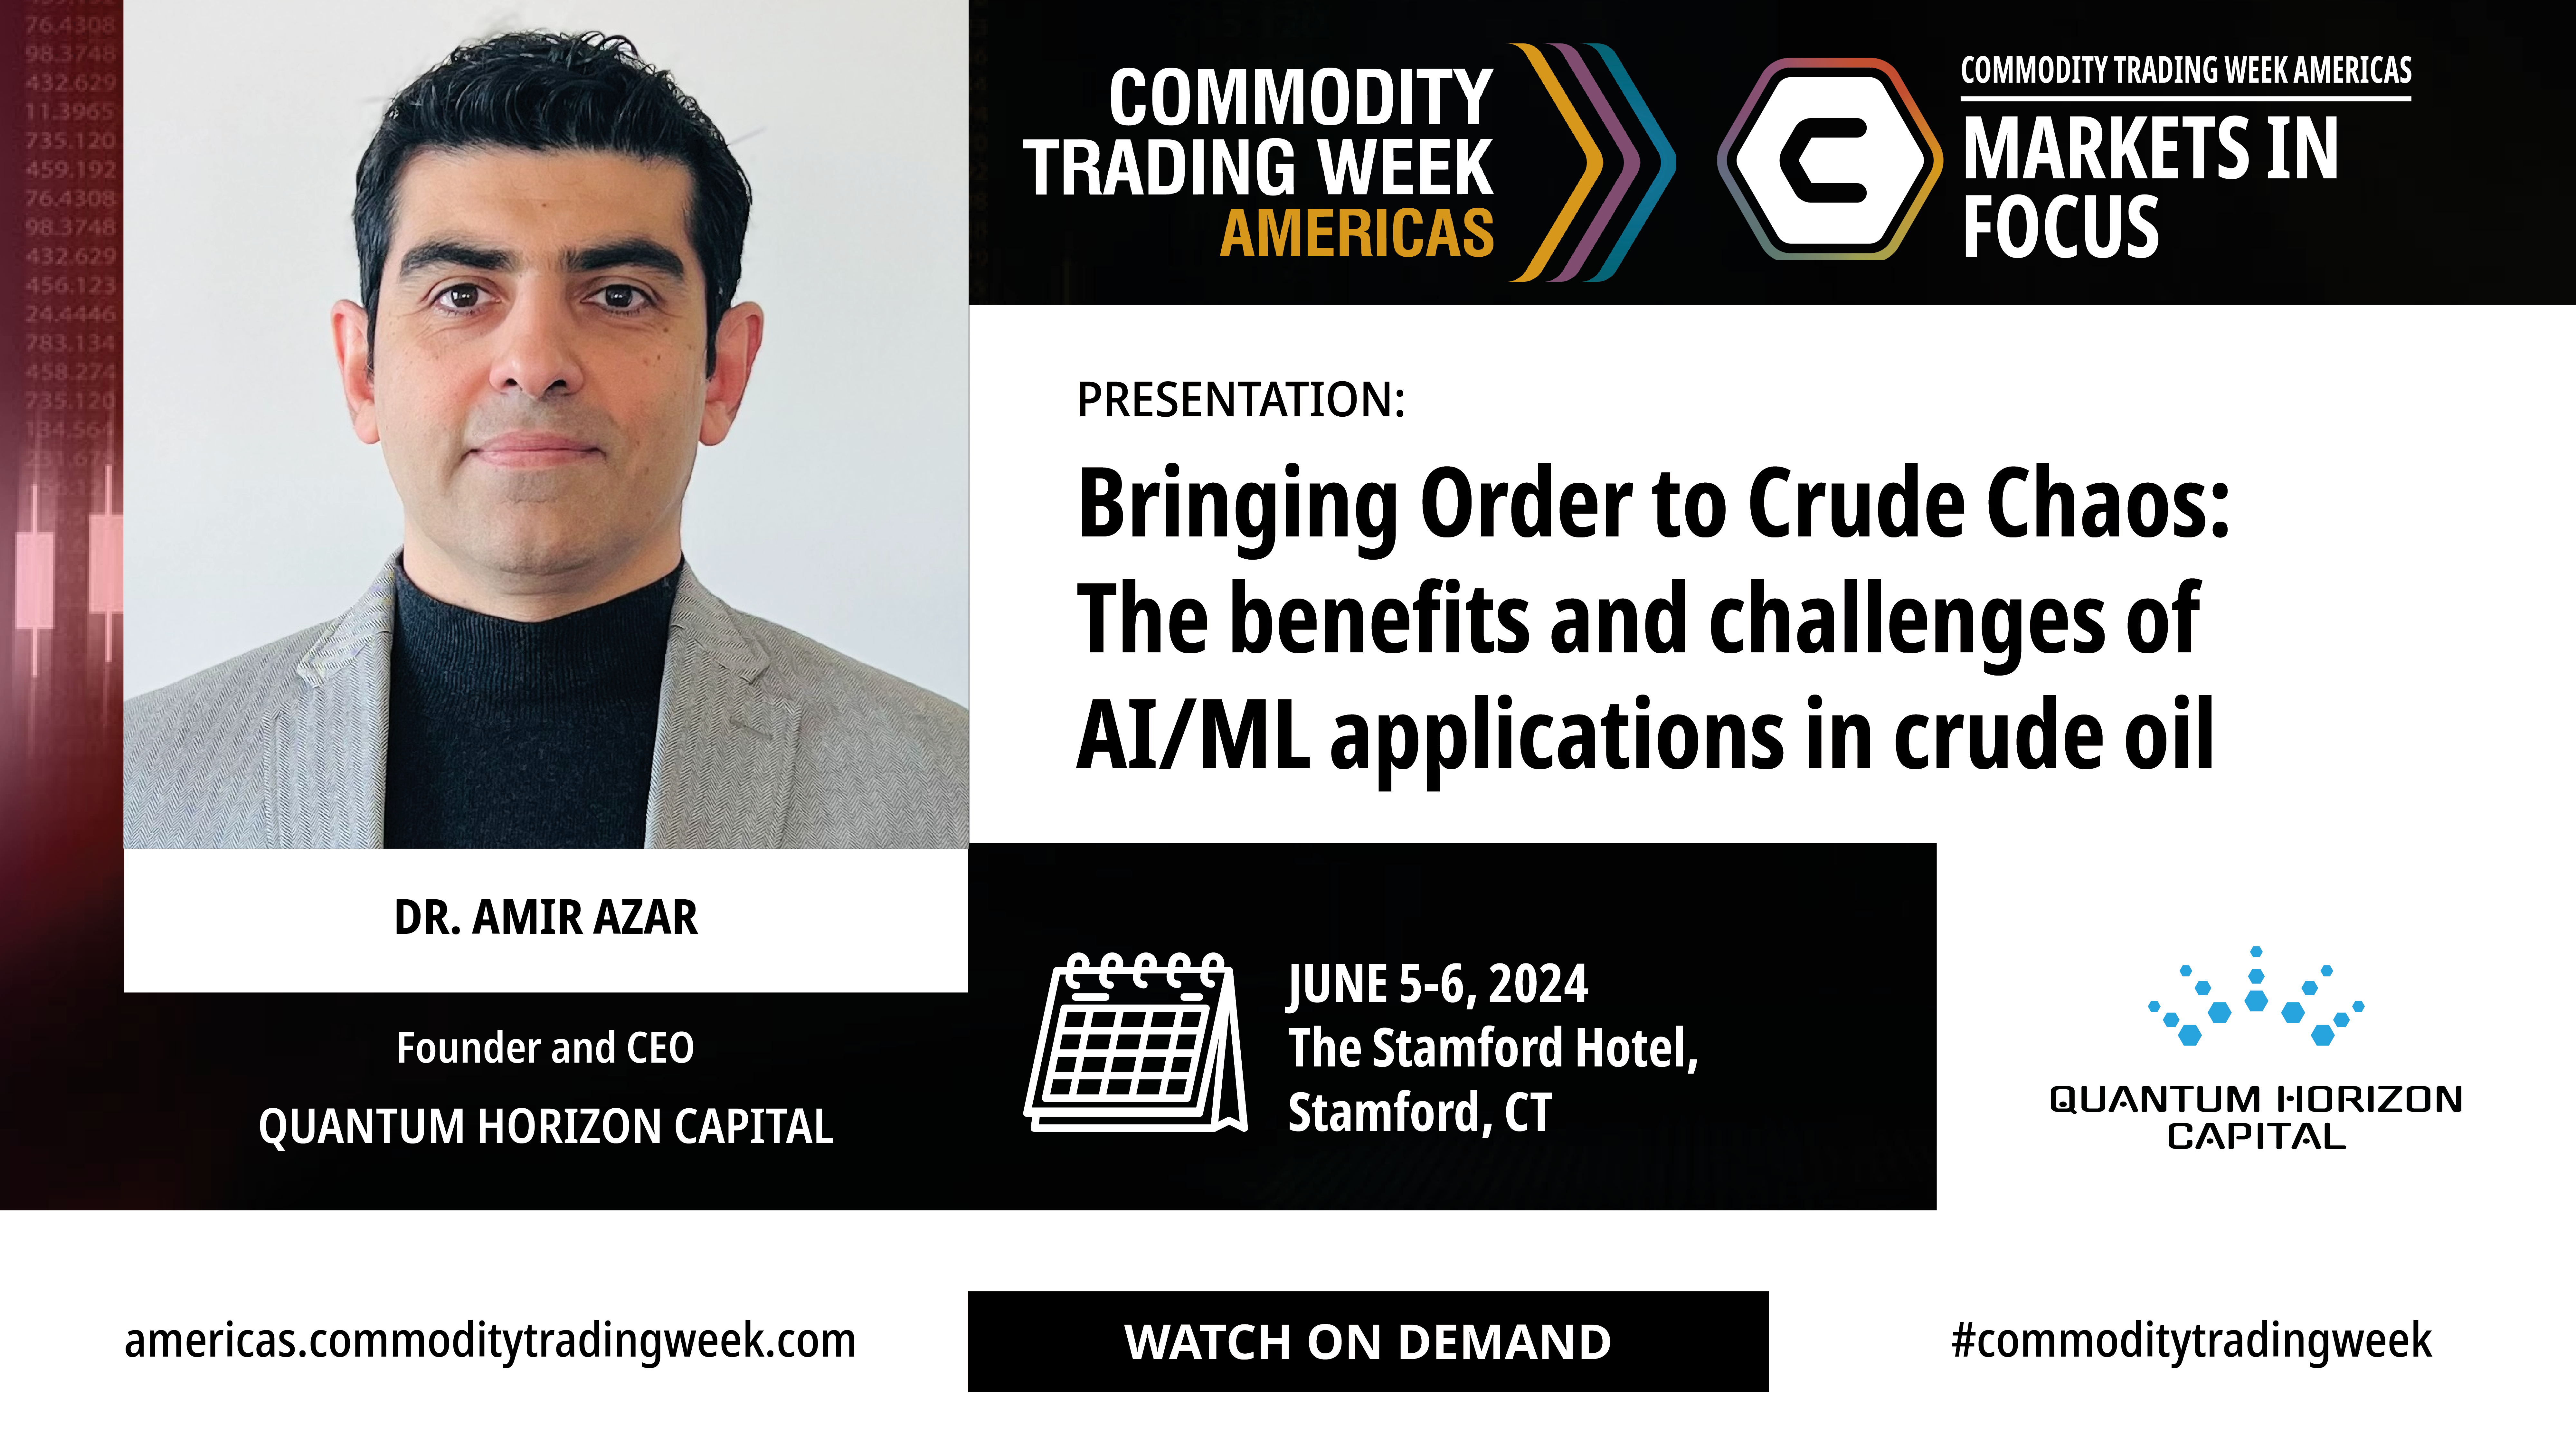 Bringing Order to Crude Chaos: The benefits and challenges of AI/ML applications in crude oil